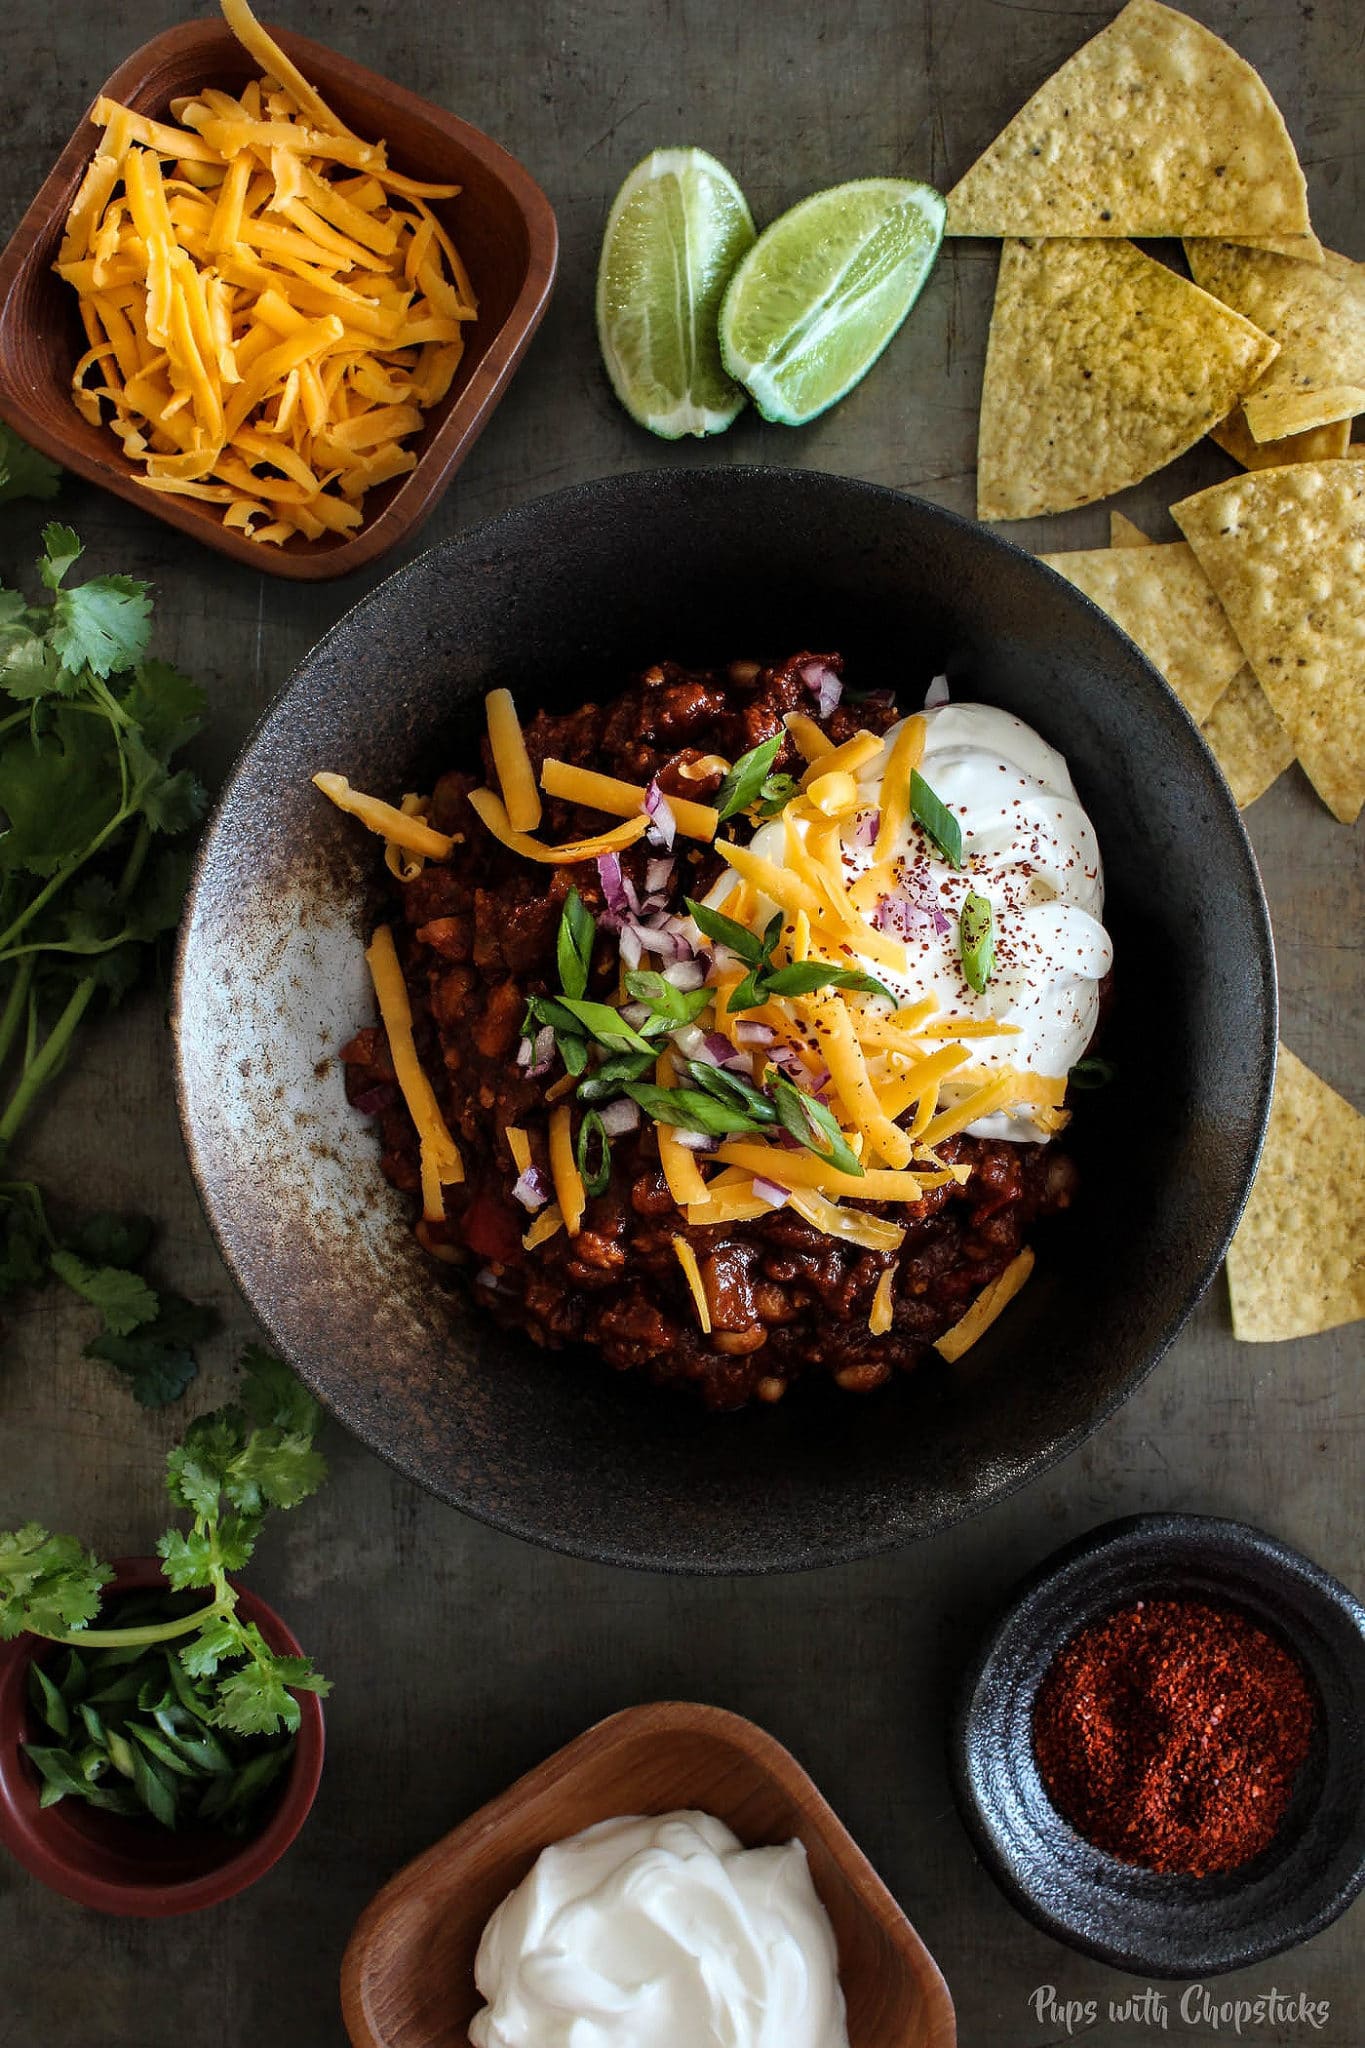 24 ridiculously addictive Gochujang recipes to enjoy this sweet and spicy Korean chili paste! #Korean #Asian #spicy | cookingtheglobe.com